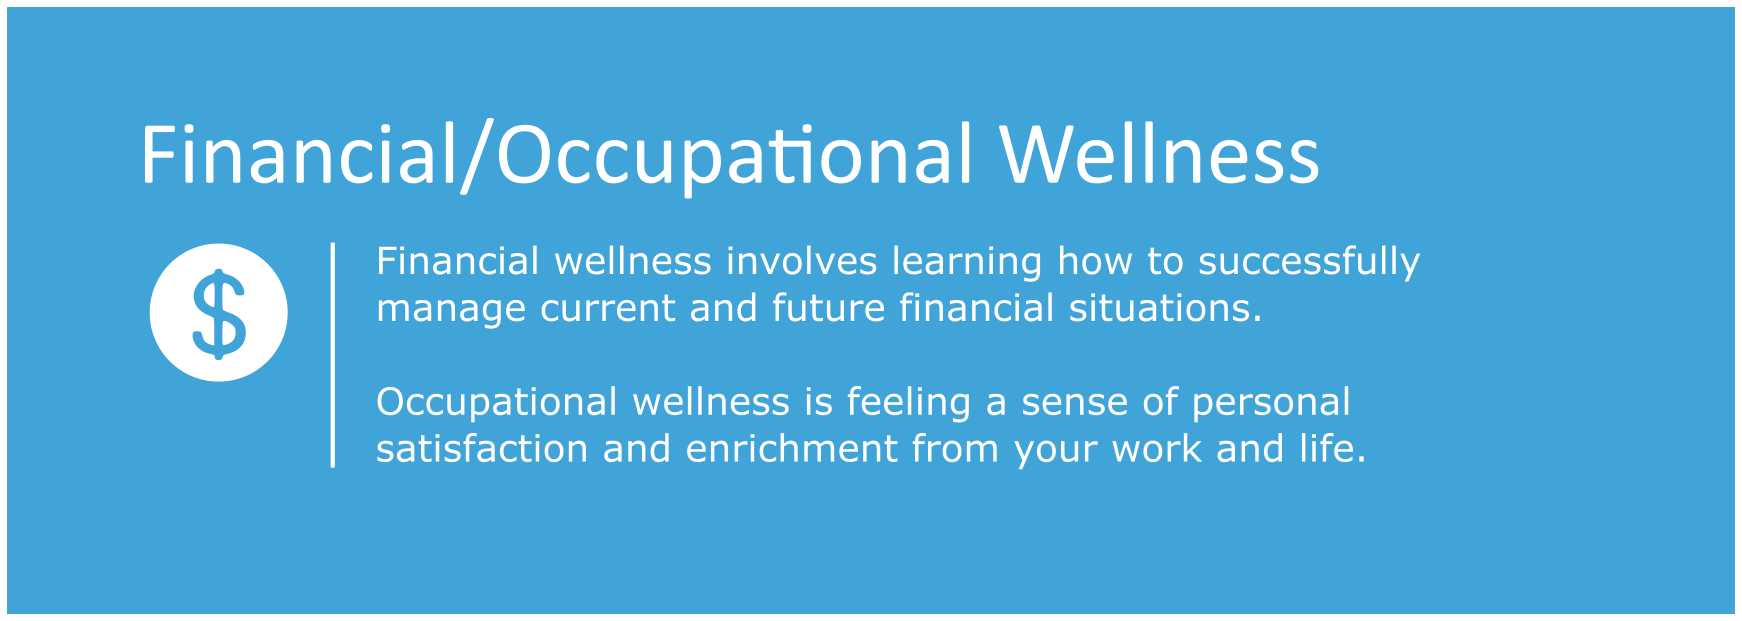 Financial Wellness involves learning how to successfully manage current and future financial situations.  Occupational wellness is feeling a sense of personal satisfaction and enrichment from your work and life. 